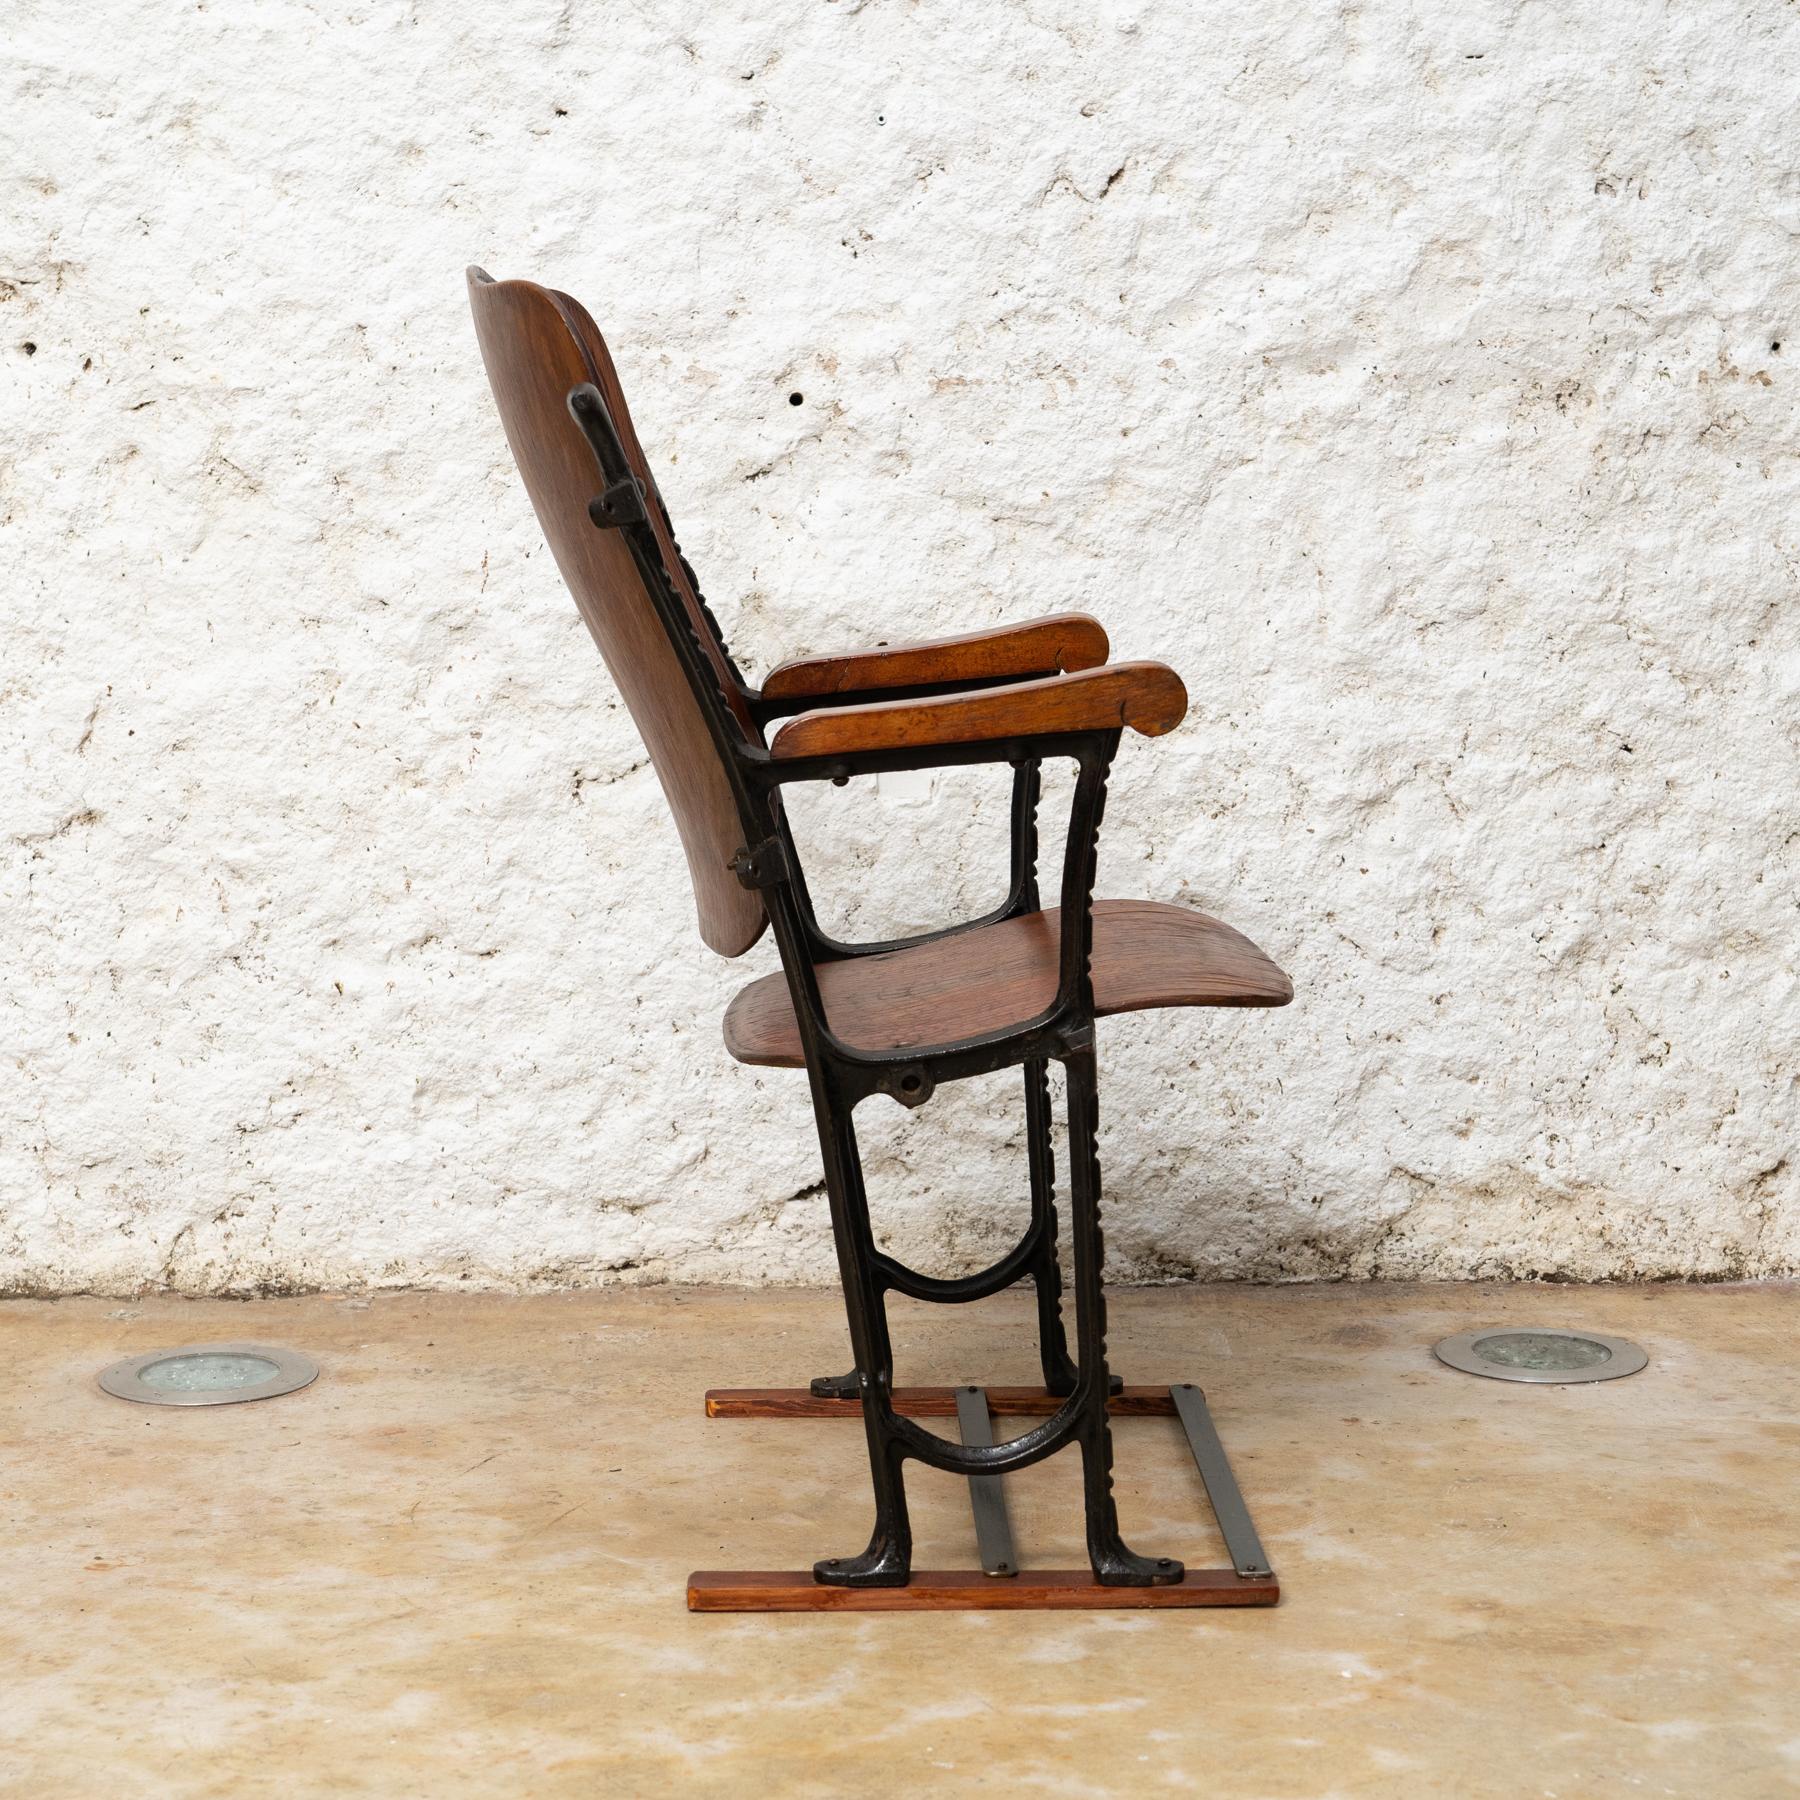 Art Nouveau Elegance in Time: Catalan Modernism Theater Chair 'Kursaal', c. 1930 For Sale